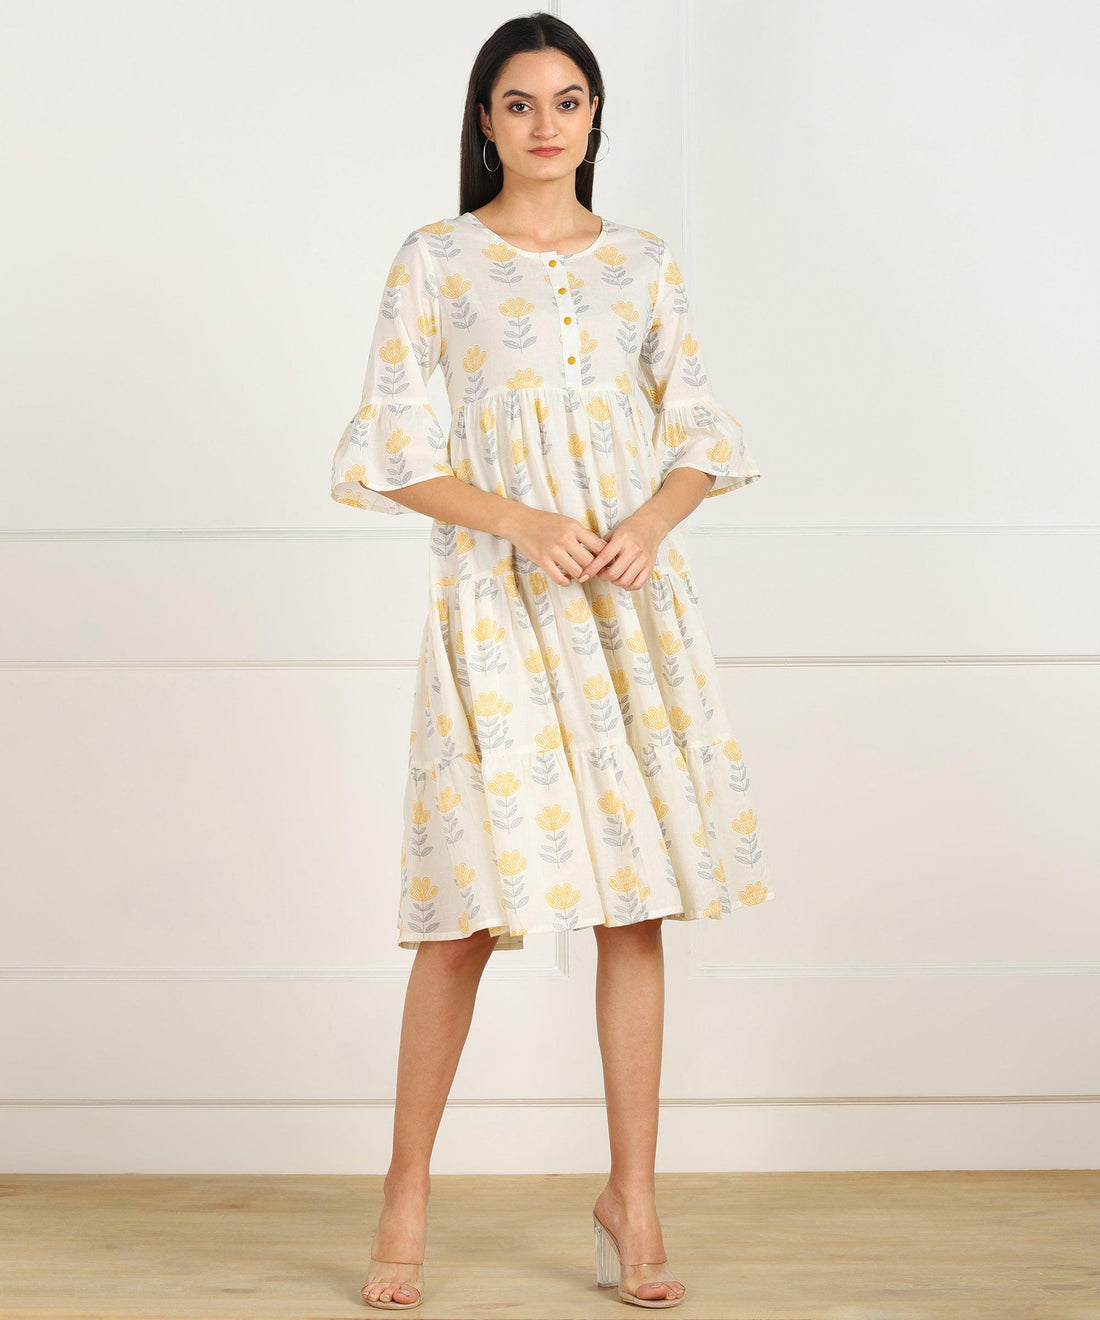 Znx White Yellow Floral Printed Flared Dress - Znxclothing